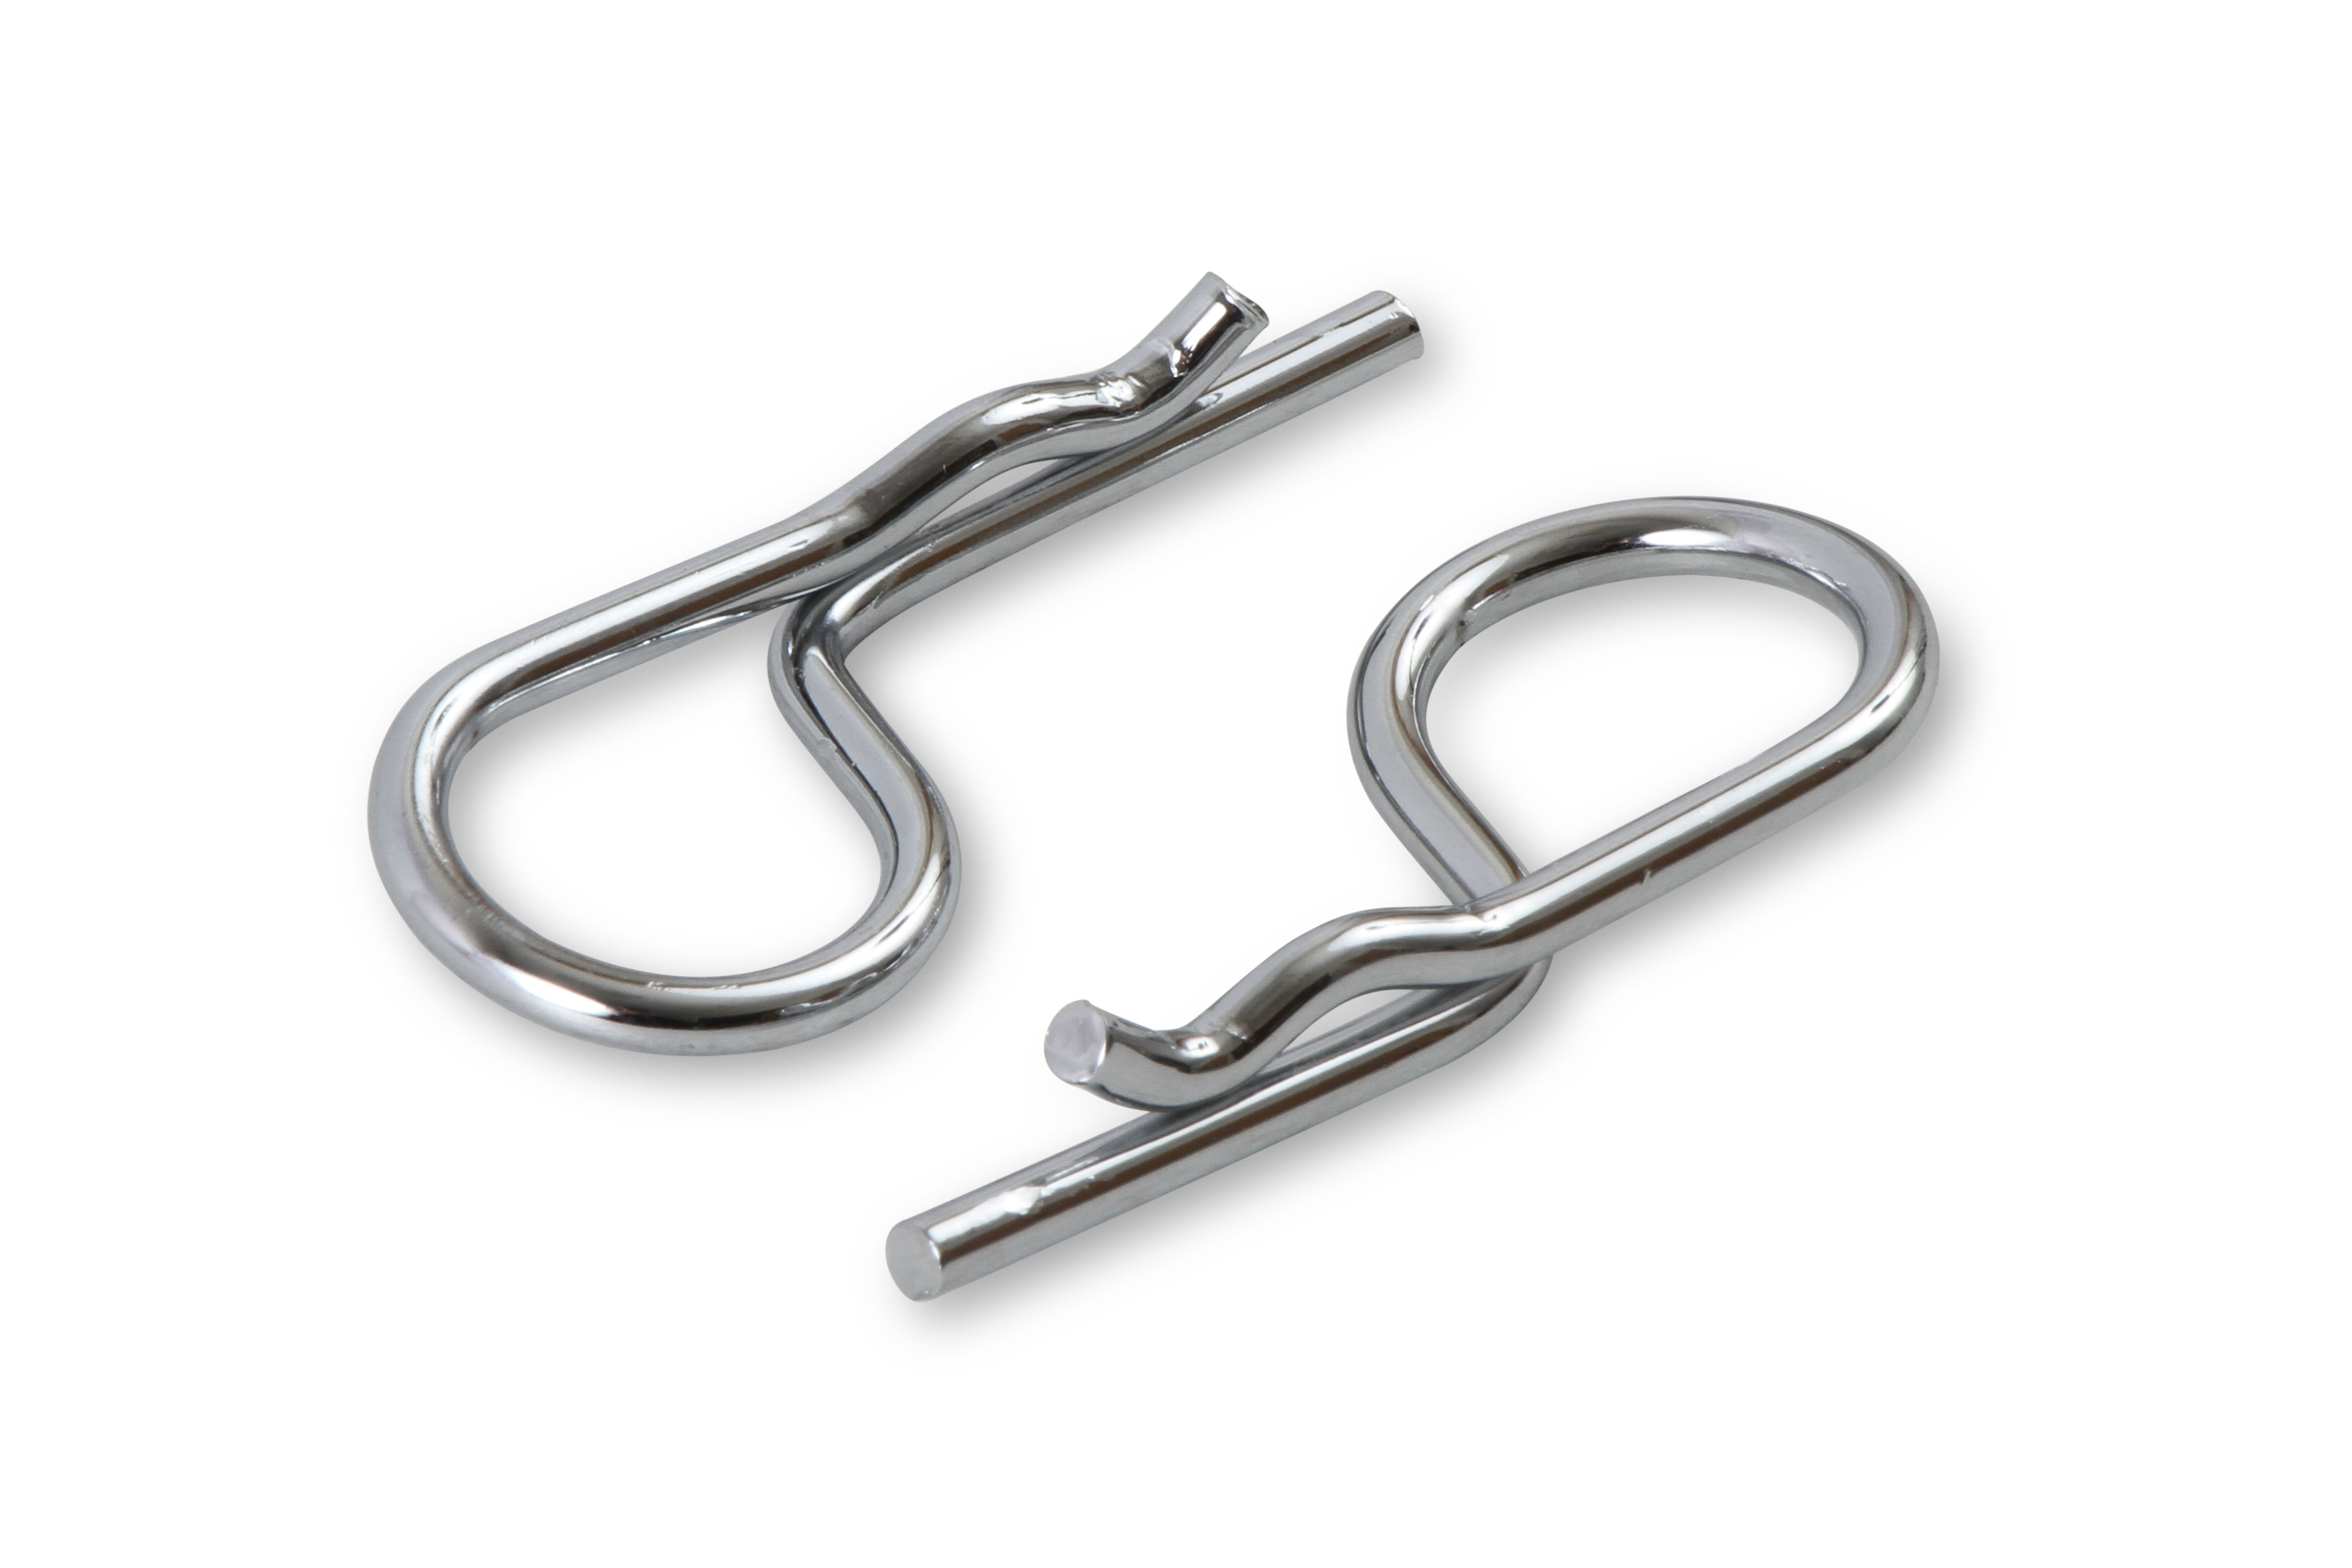 Mr Gasket 1016A Replacement Safety Pins